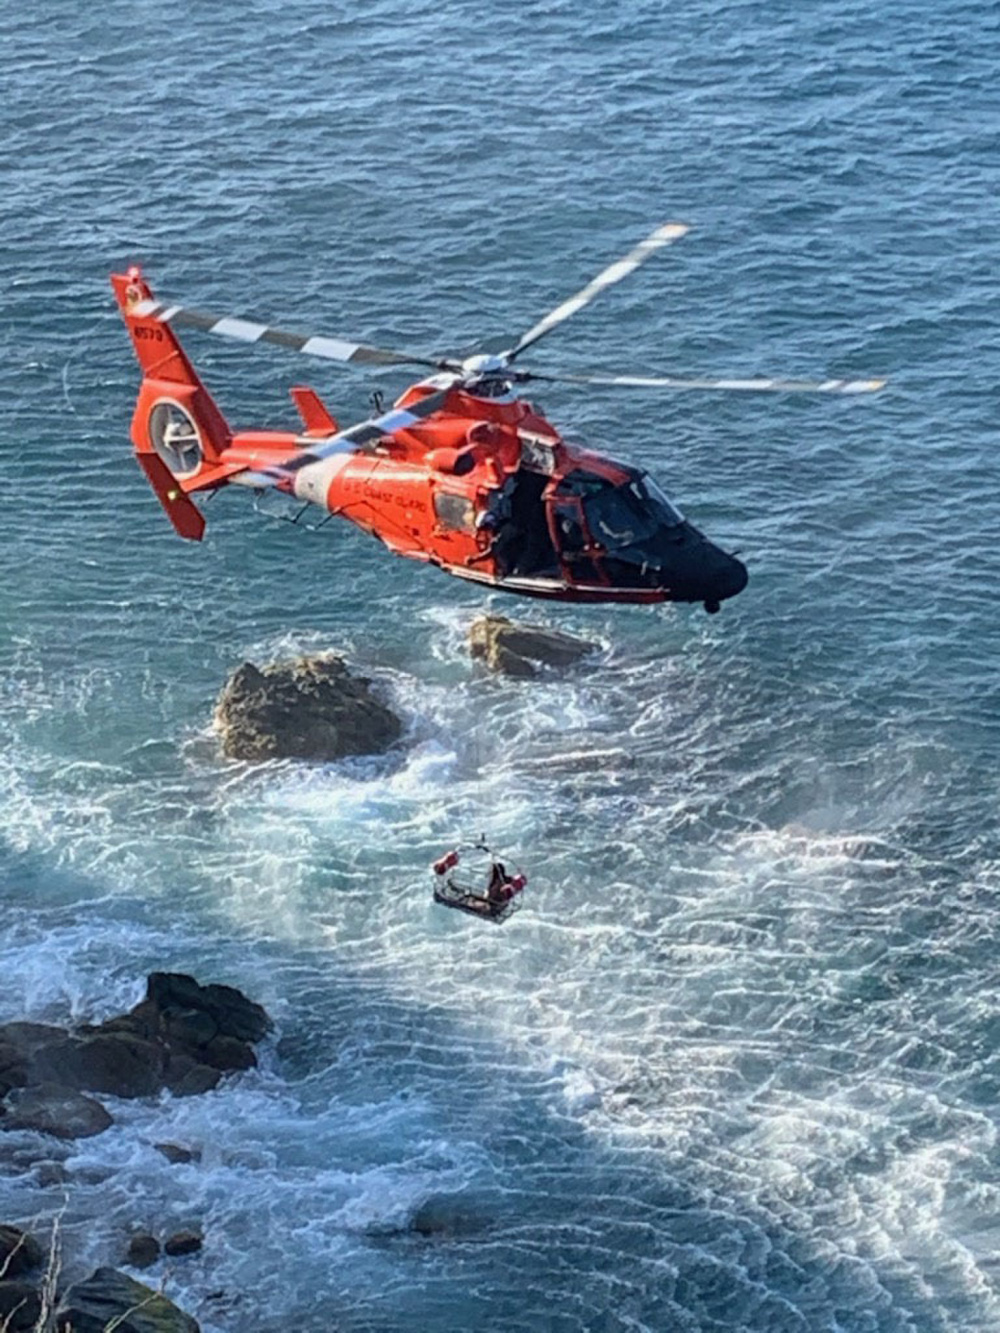 U.S. Coast Guard Aircrew Rescues 5 Stranded Kayakers At Caret Point In St. Thomas